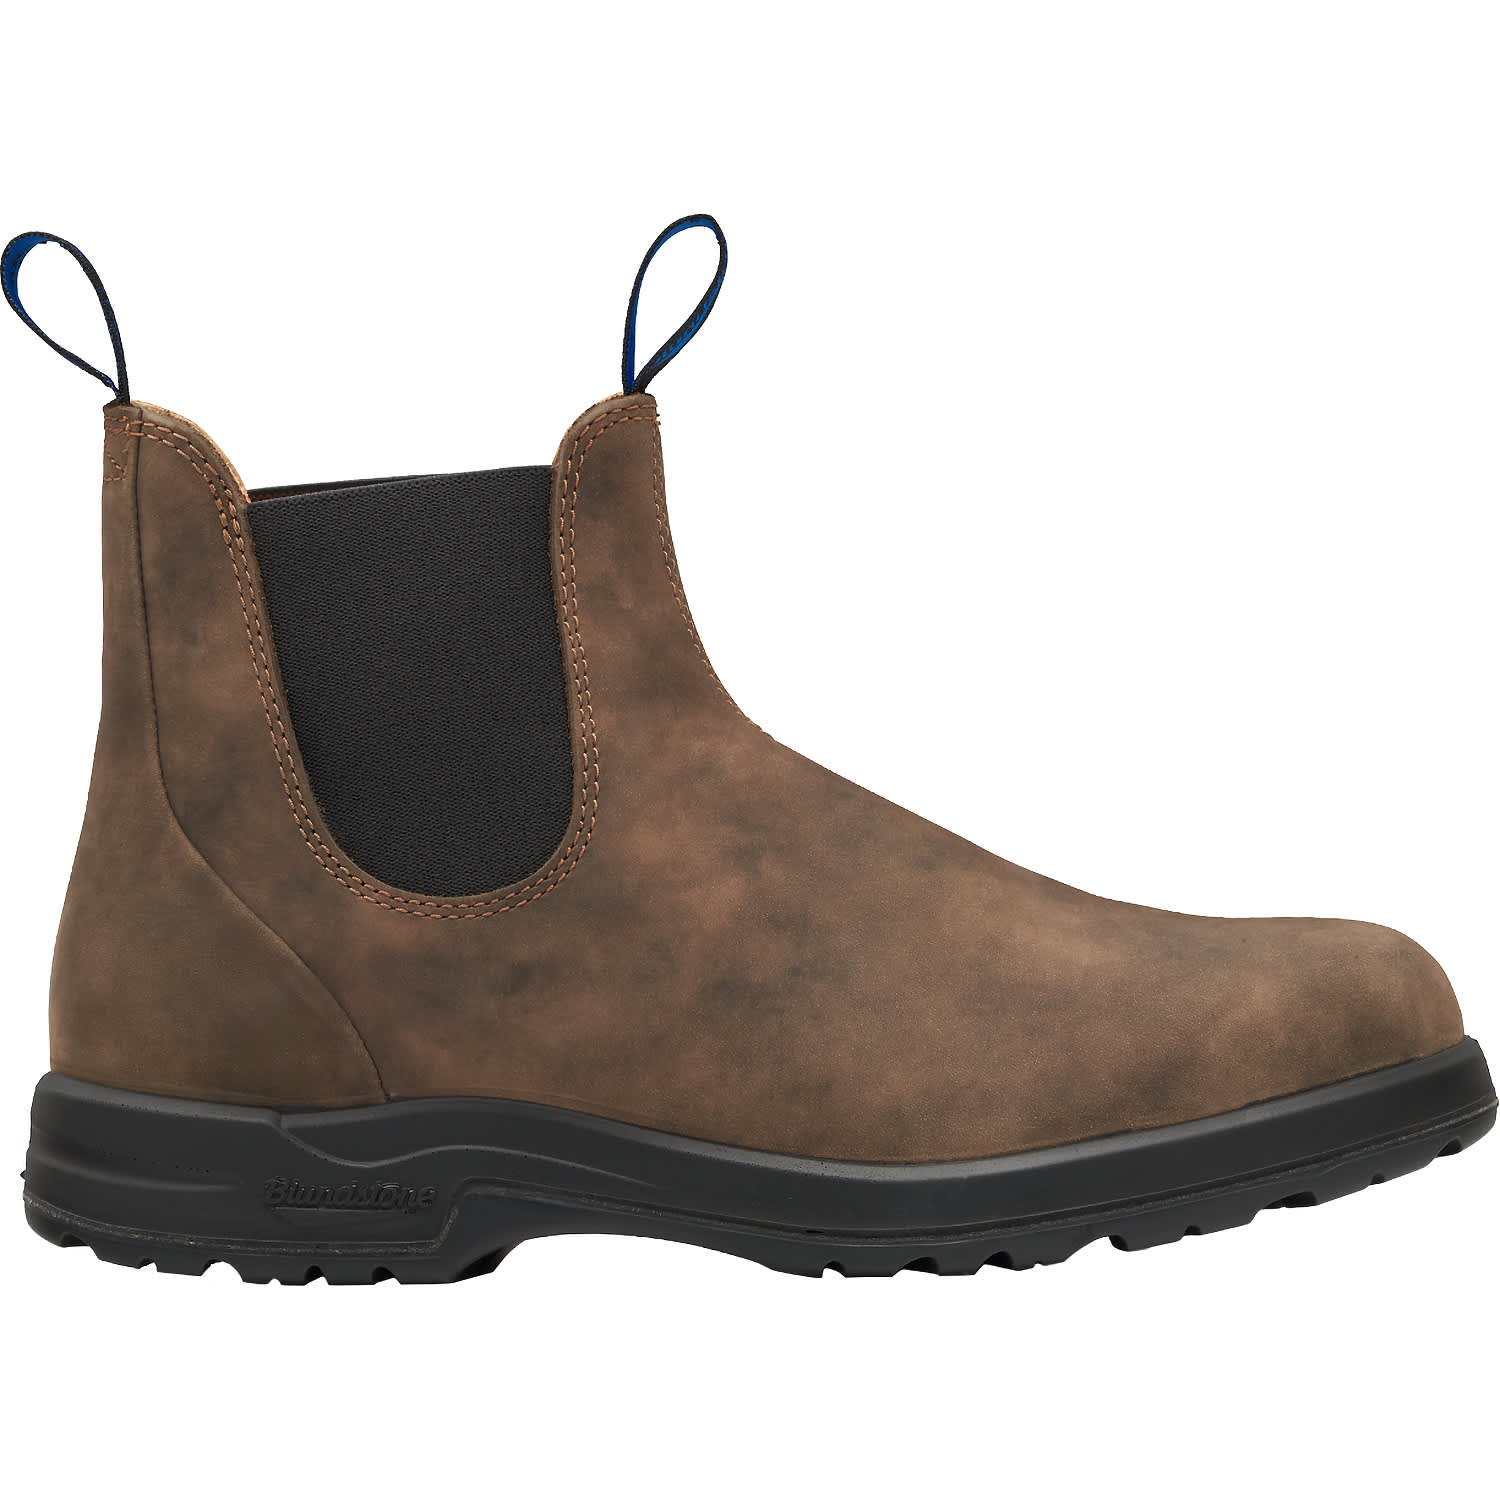 Blundstone® Unisex 2242 All-Terrain Thermal Chelsea Boots